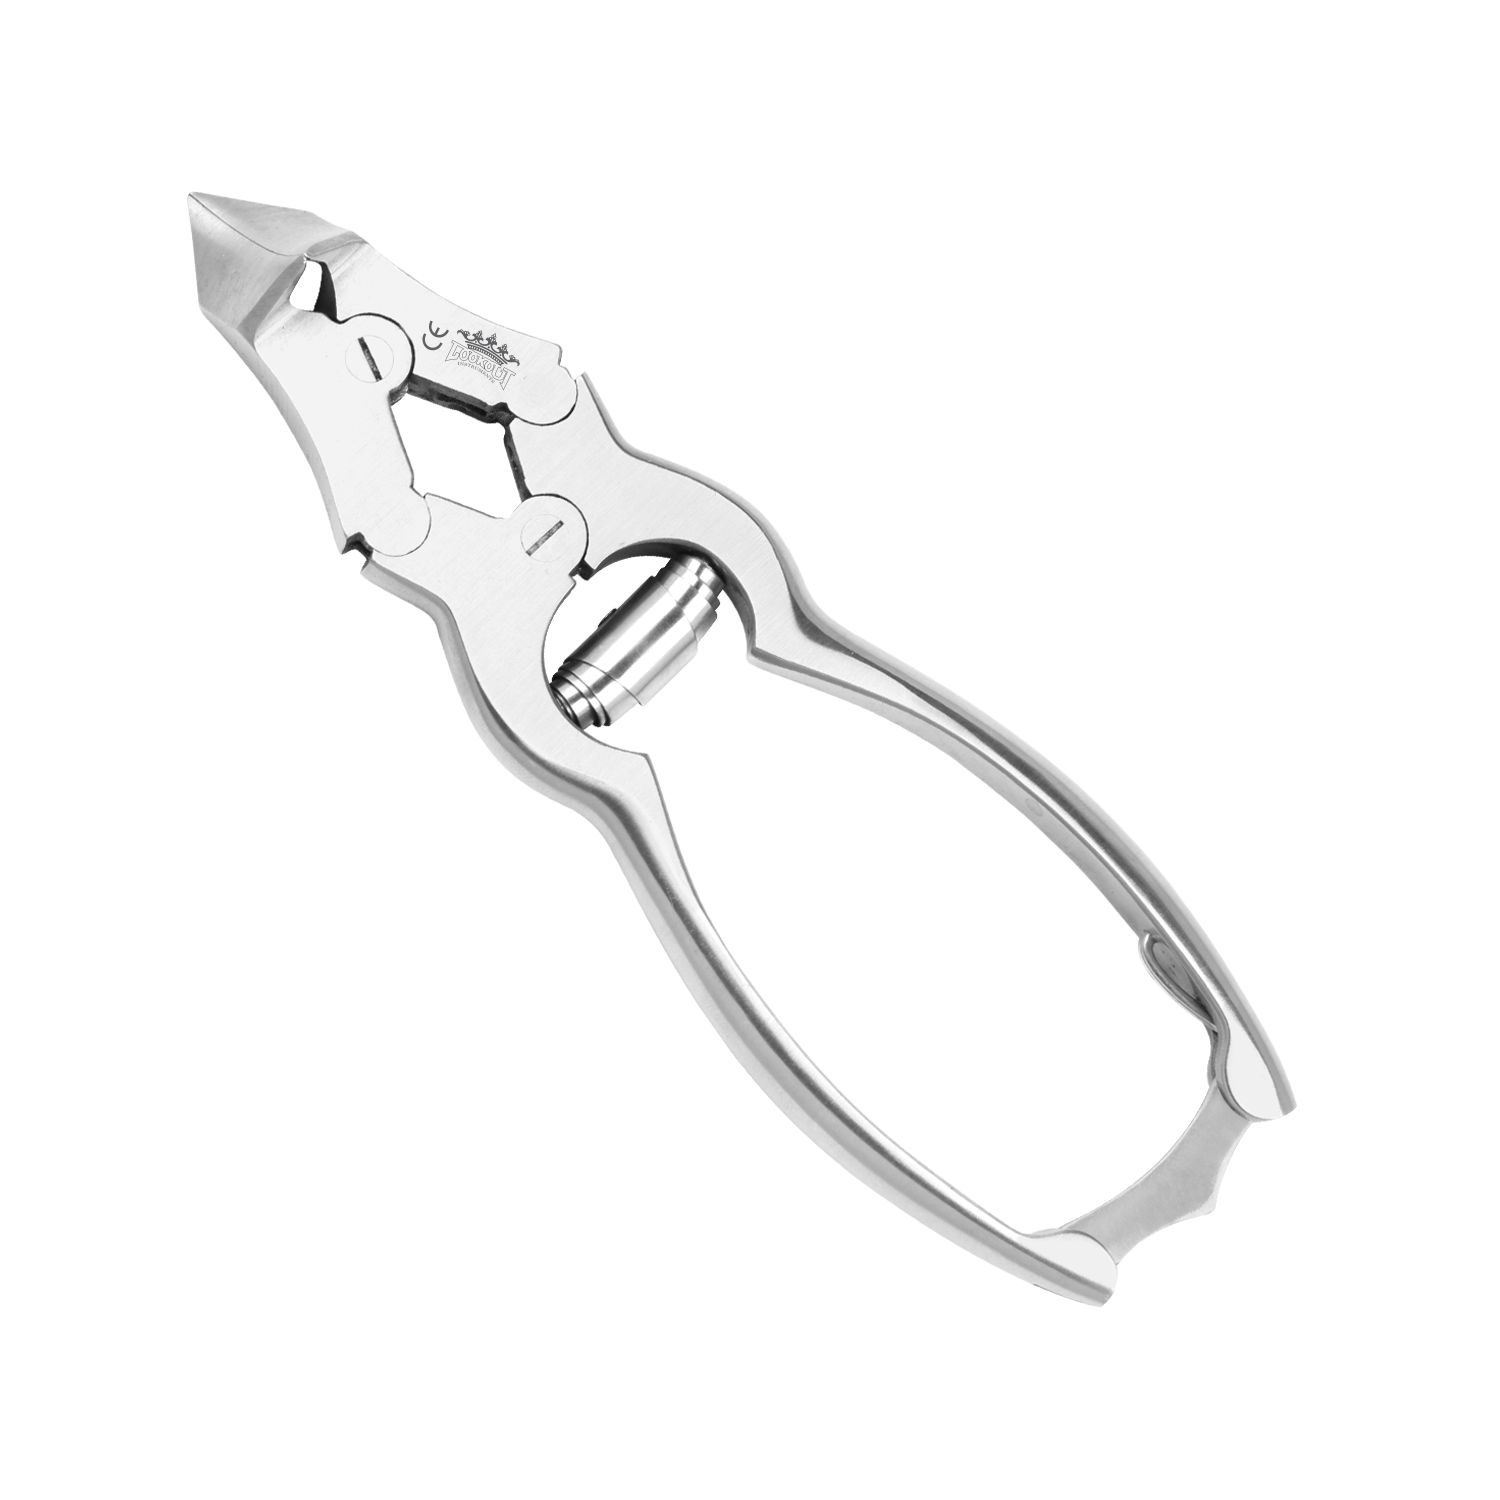 Nail Pliers - Double Action